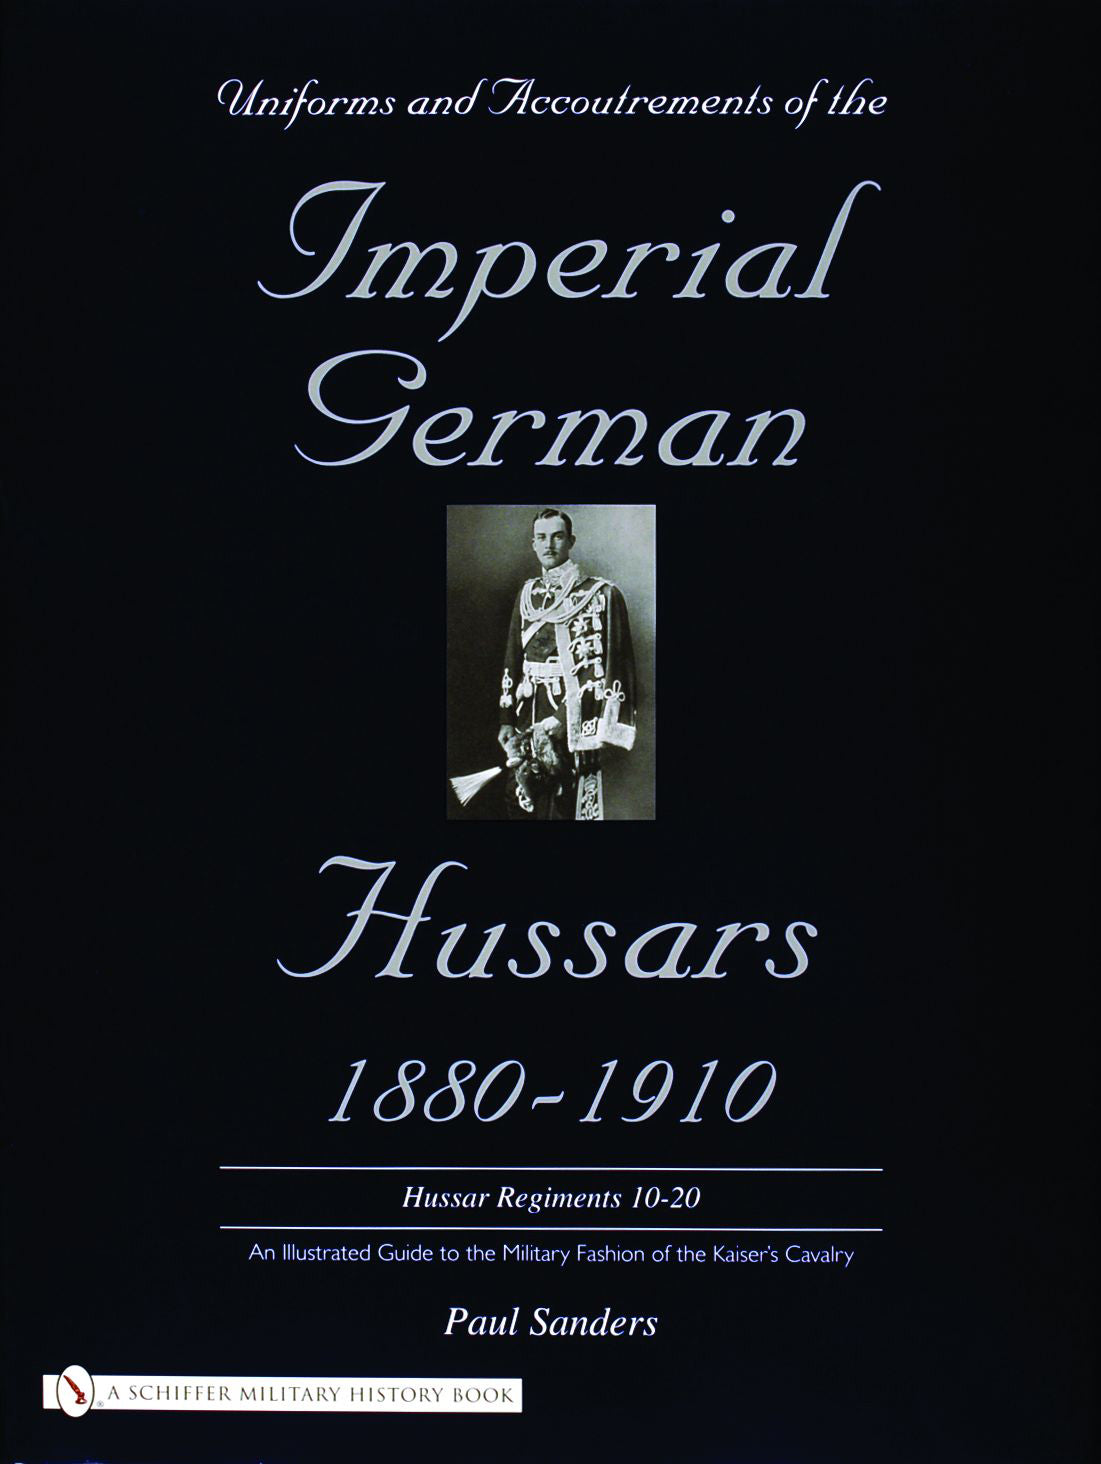 Uniforms & Accoutrements of the Imperial German Hussars 1880-1910